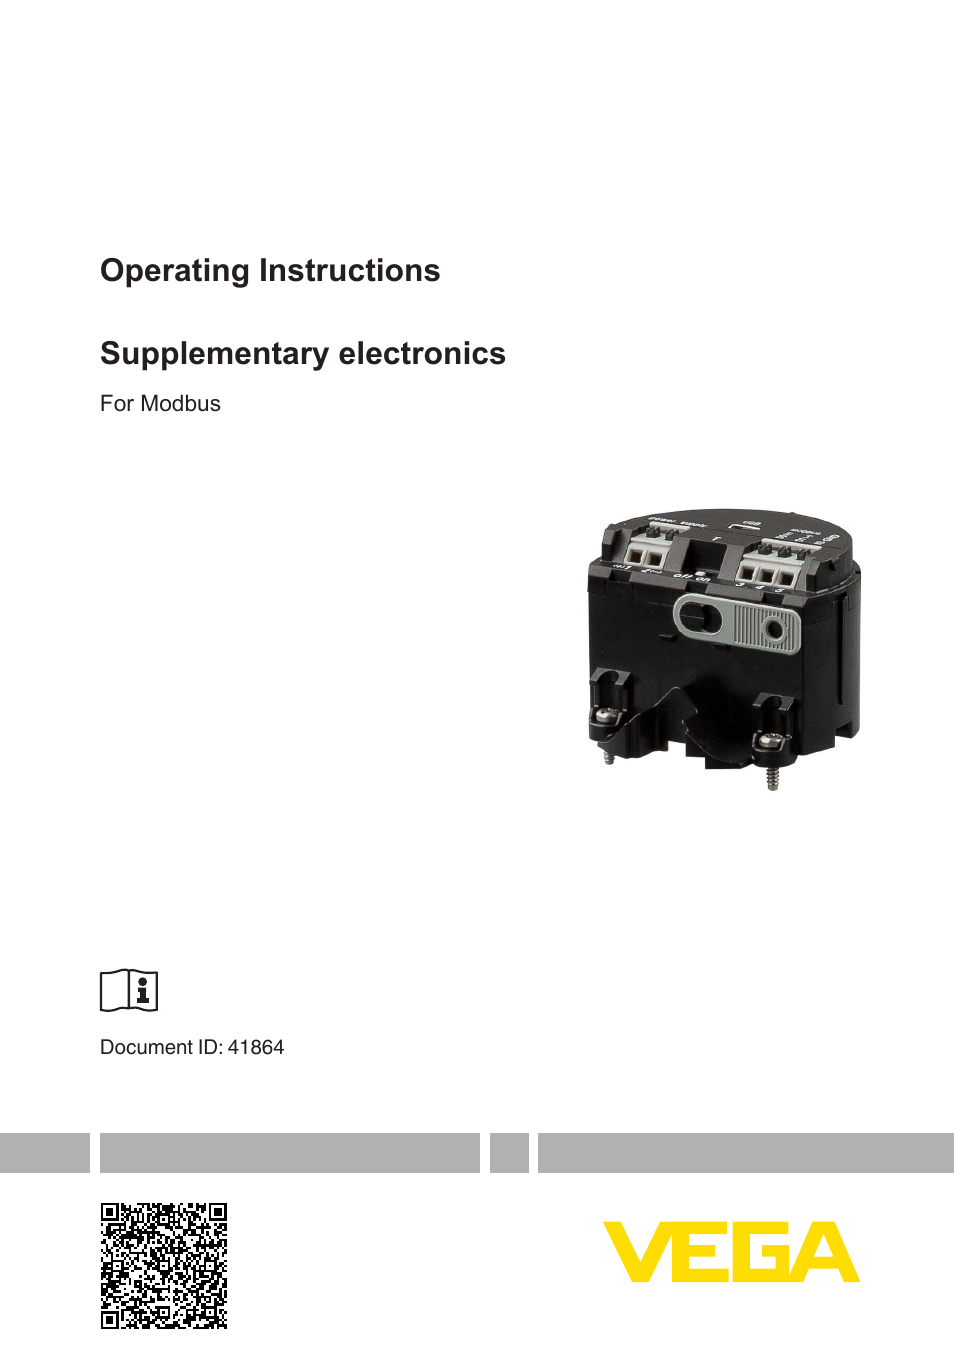 Supplementary electronics For Modbus